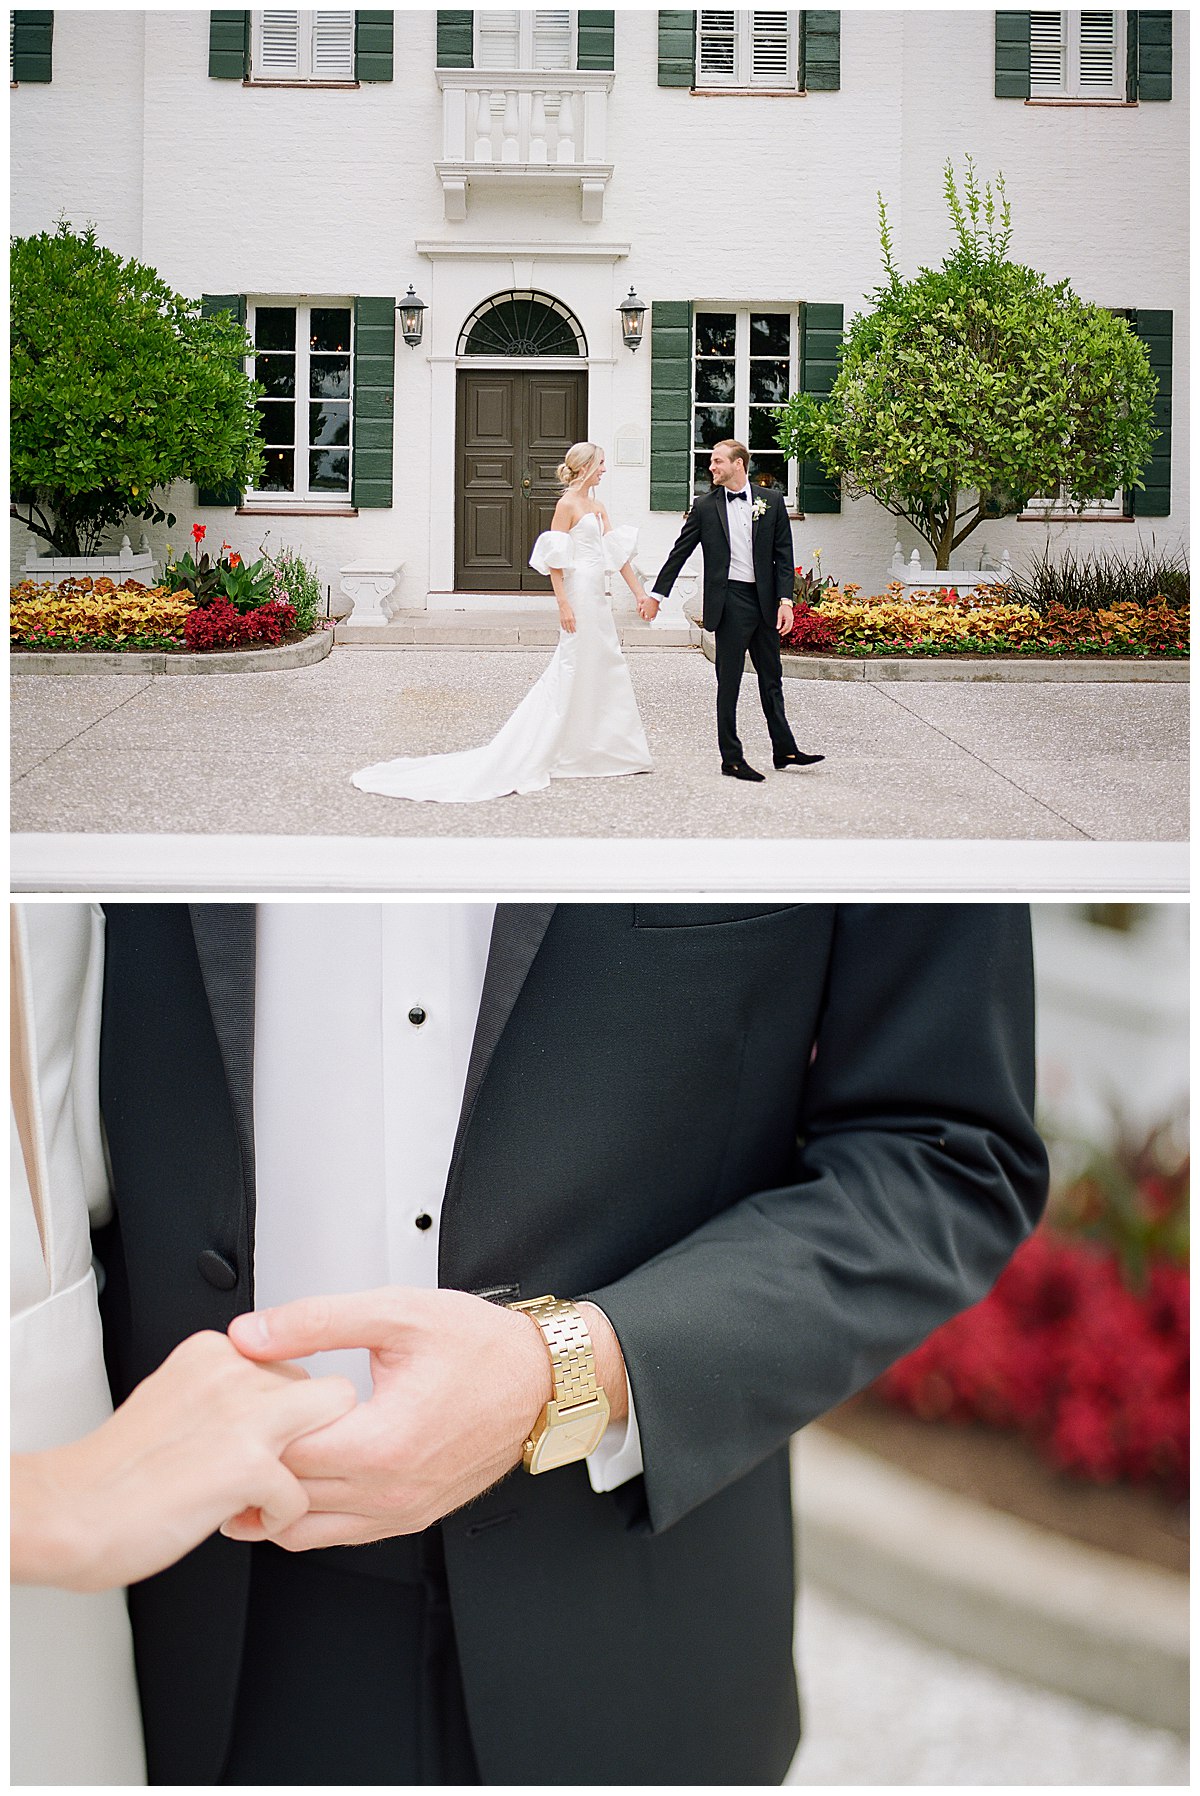 Bride and groom walking outside and close up of their hands and rings